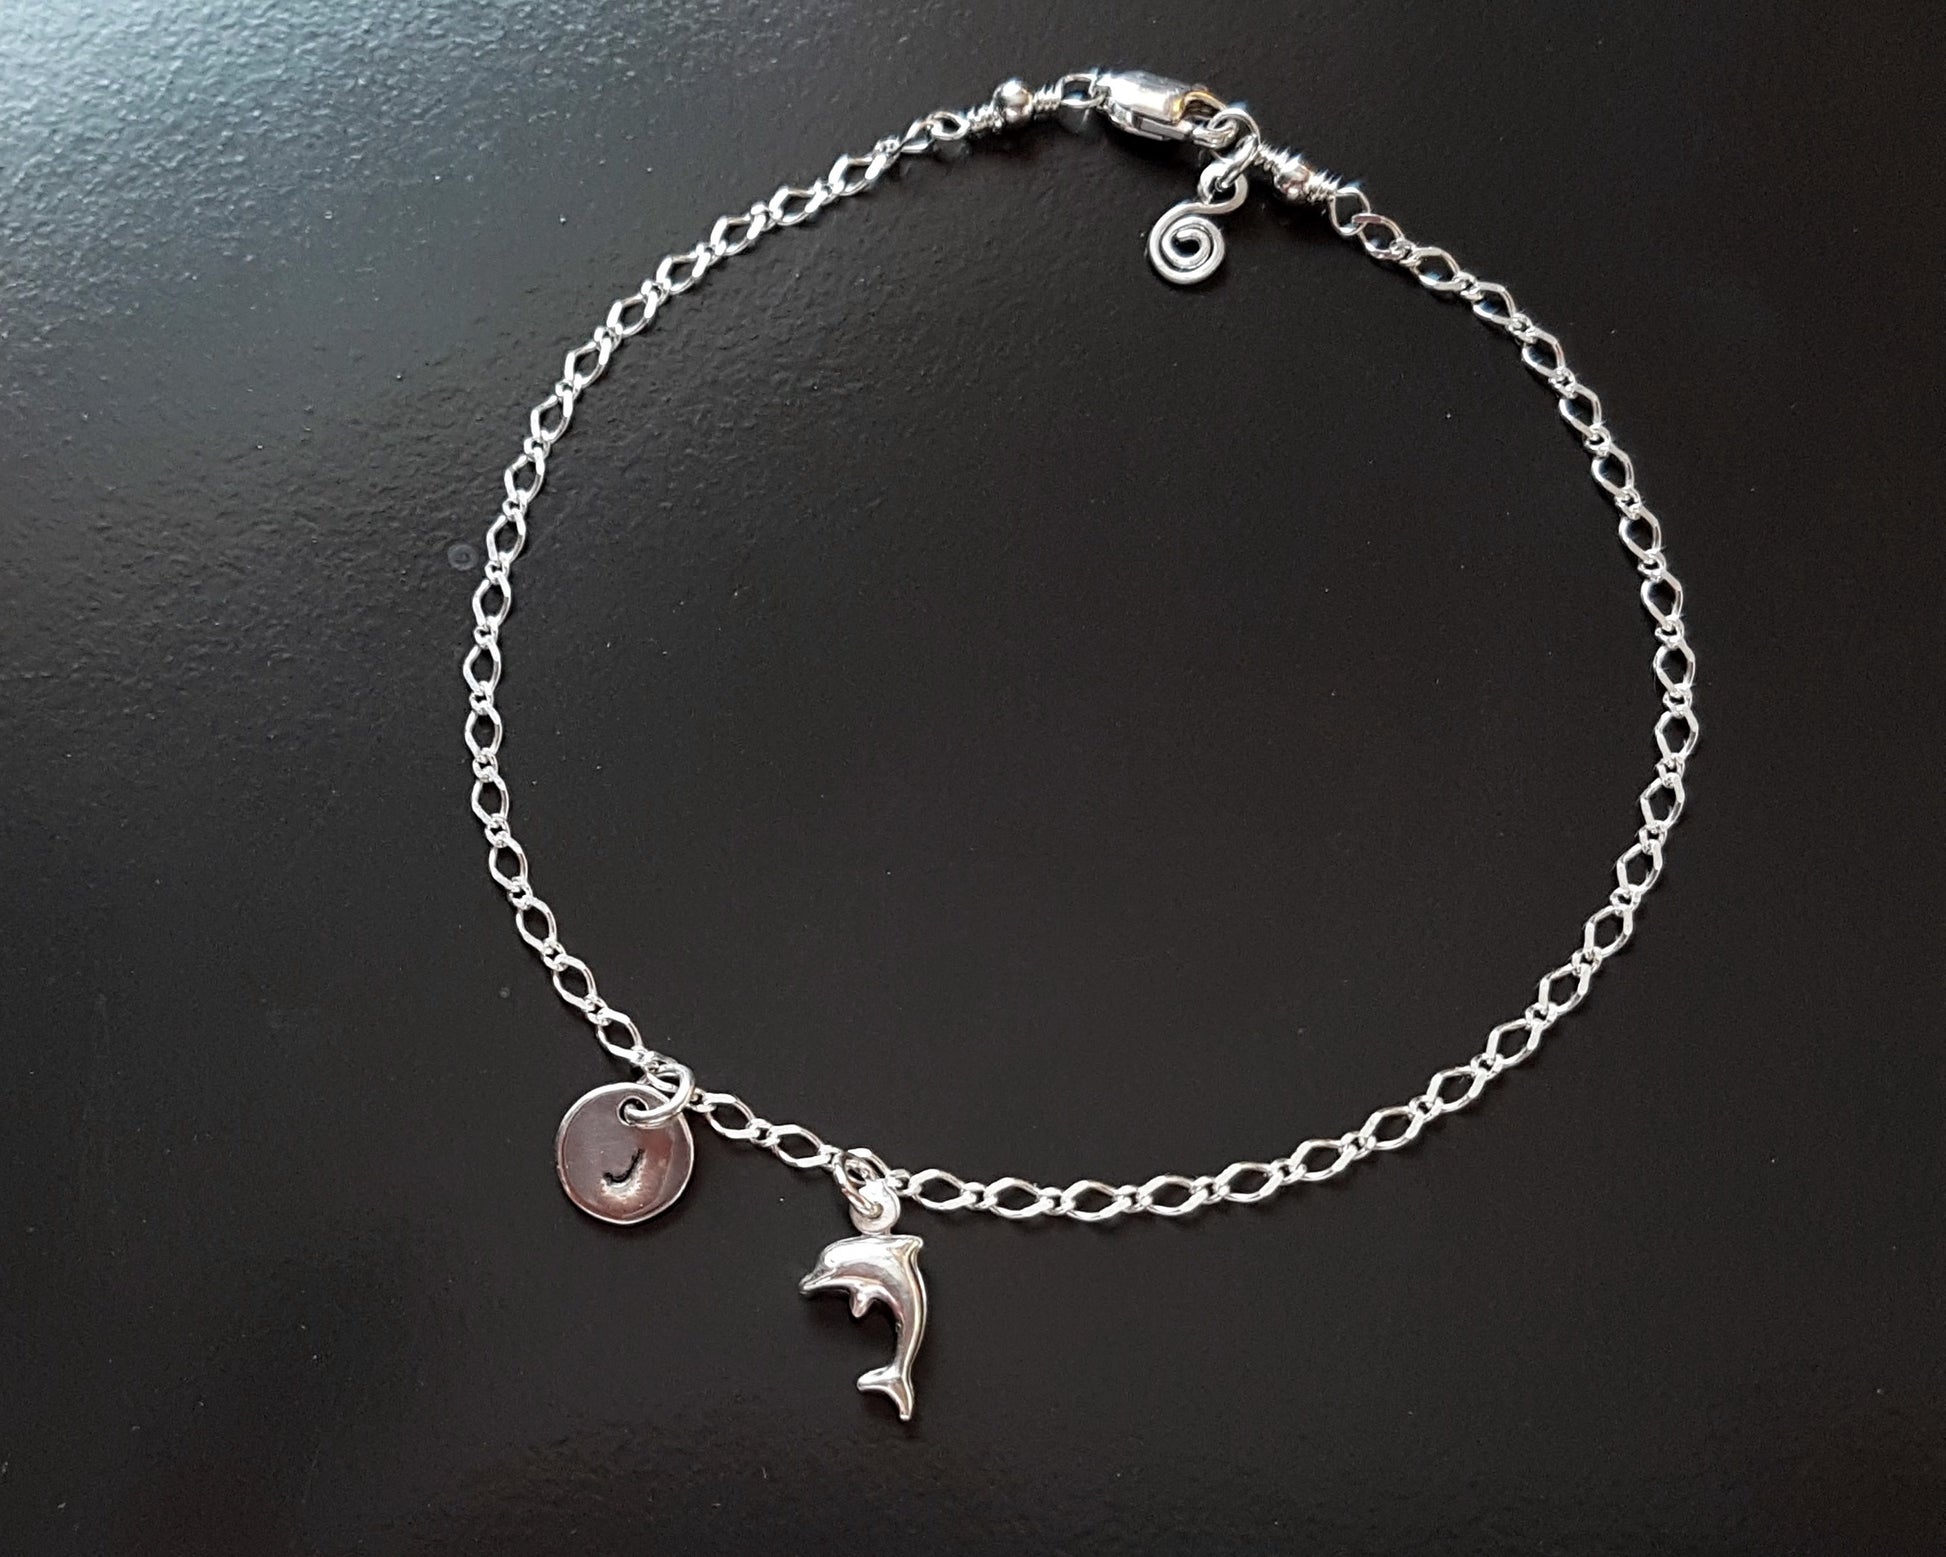 Personalized Silver Dolphin, Initial, Eternity Coil Ankle Bracelet-Anklet with a Dolphin pendant and round disk shaped Initial pendant dangling from flat figaro style chain 